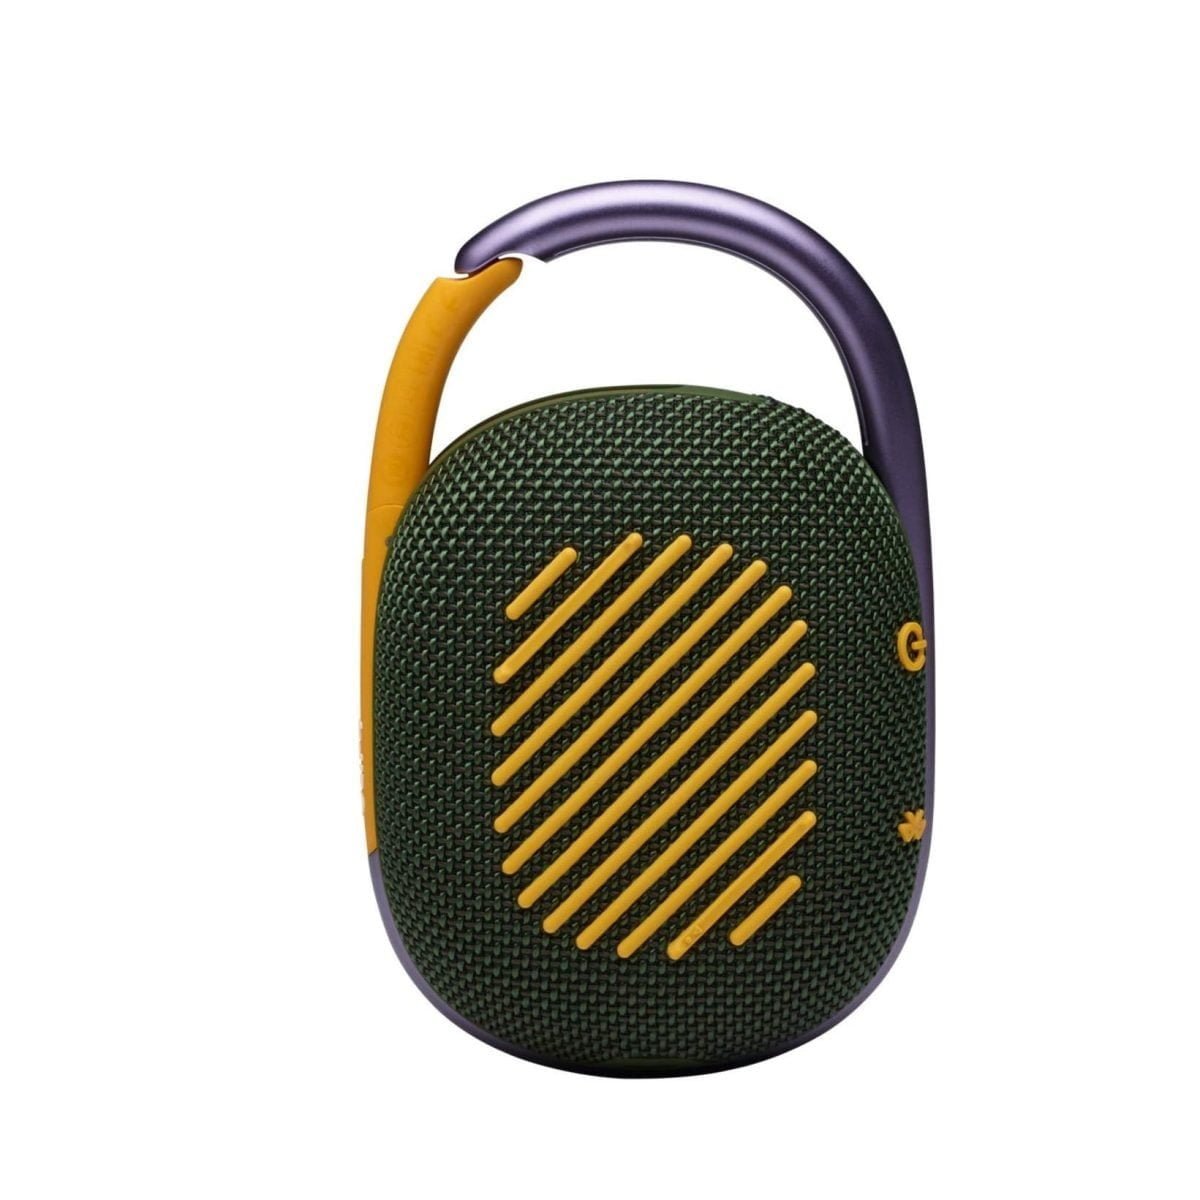 71Q1Dfw9Zgl. Ac Sl1500 Jbl &Lt;H1&Gt;Jbl Clip4 Ultra-Portable Waterproof Speaker - Green&Lt;/H1&Gt; Https://Www.youtube.com/Watch?V=Vufgwfbax_K Clip And Play Cool, Portable, And Waterproof. The Vibrant Fresh Looking Jbl Clip 4 Delivers Surprisingly Rich Jbl Original Pro Sound In A Compact Package. The Unique Oval Shape Fits Easy In Your Hand. Fully Wrapped In Colorful Fabrics With Expressive Details Inspired By Current Street Fashion, It’s Easy To Match Your Style. The Fully Integrated Carabiner Hooks Instantly To Bags, Belts, Or Buckles, To Bring Your Favorite Tunes Anywhere. Waterproof, Dustproof, And Up To 10 Hours Of Playtime, It’s Rugged Enough To Tag Along Wherever You Explore. &Nbsp; Jbl Clip4 Jbl Clip4 Ultra-Portable Waterproof Speaker - Green